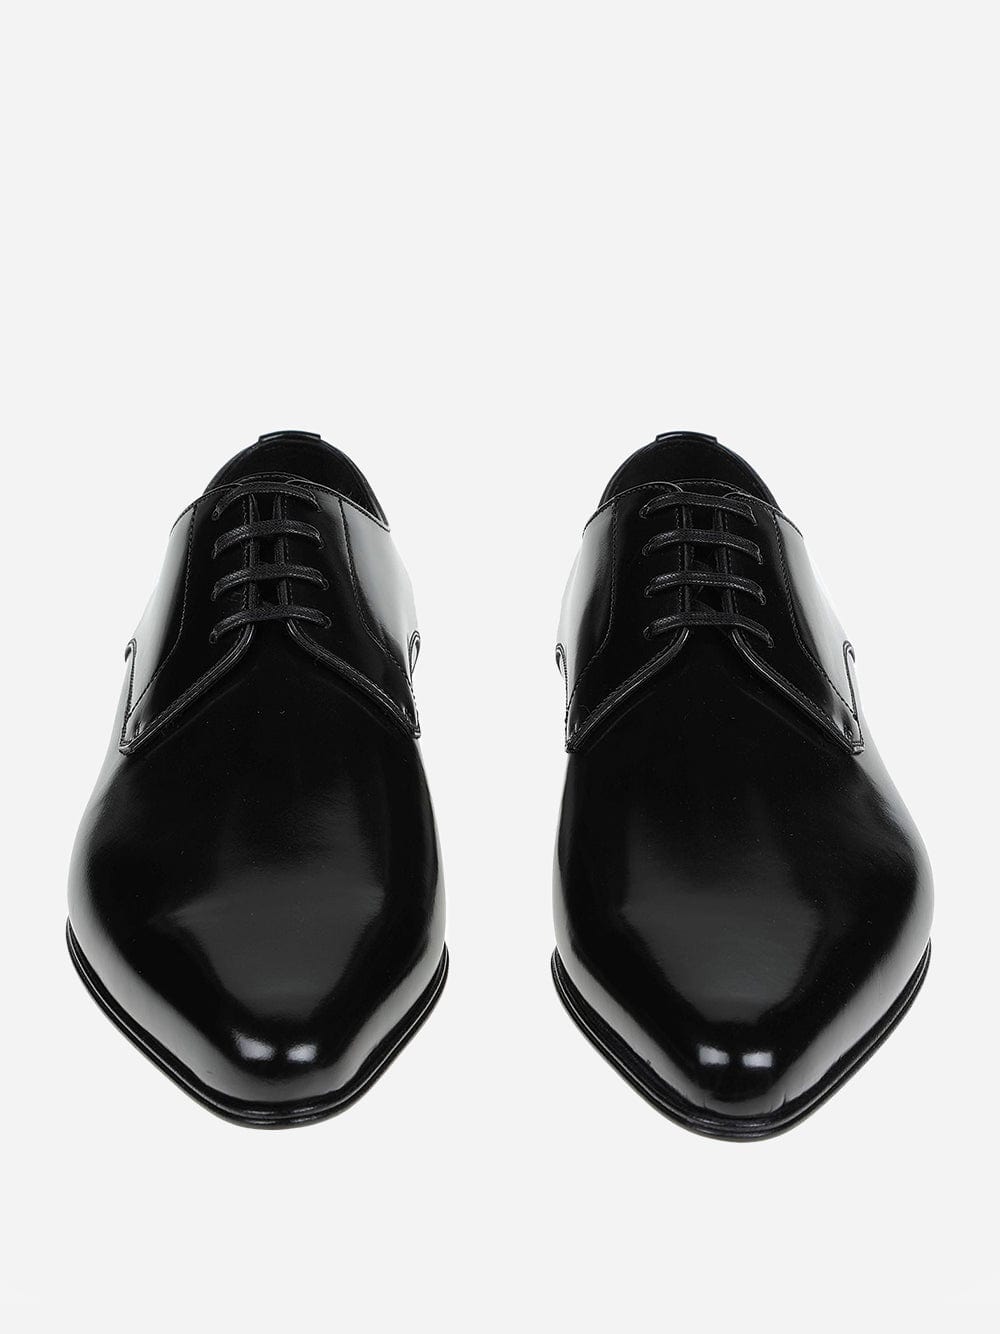 Dolce & Gabbana Formal Leather Derby Shoes